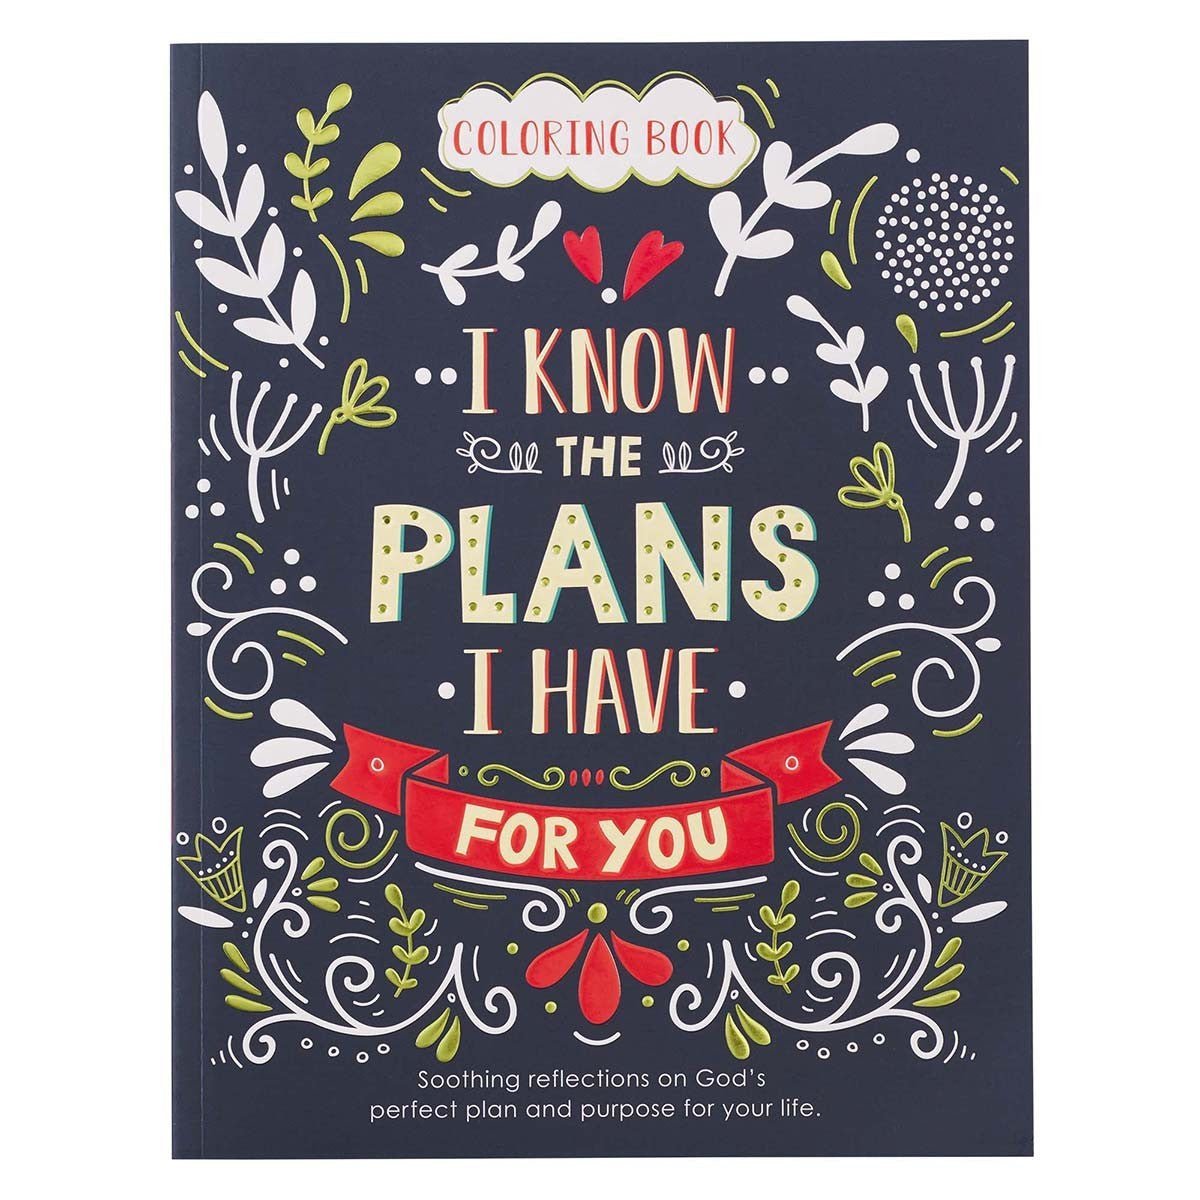 I Know the Plans I Have for You Coloring Book for Adults - Jeremiah 29:11 | 2FruitBearers